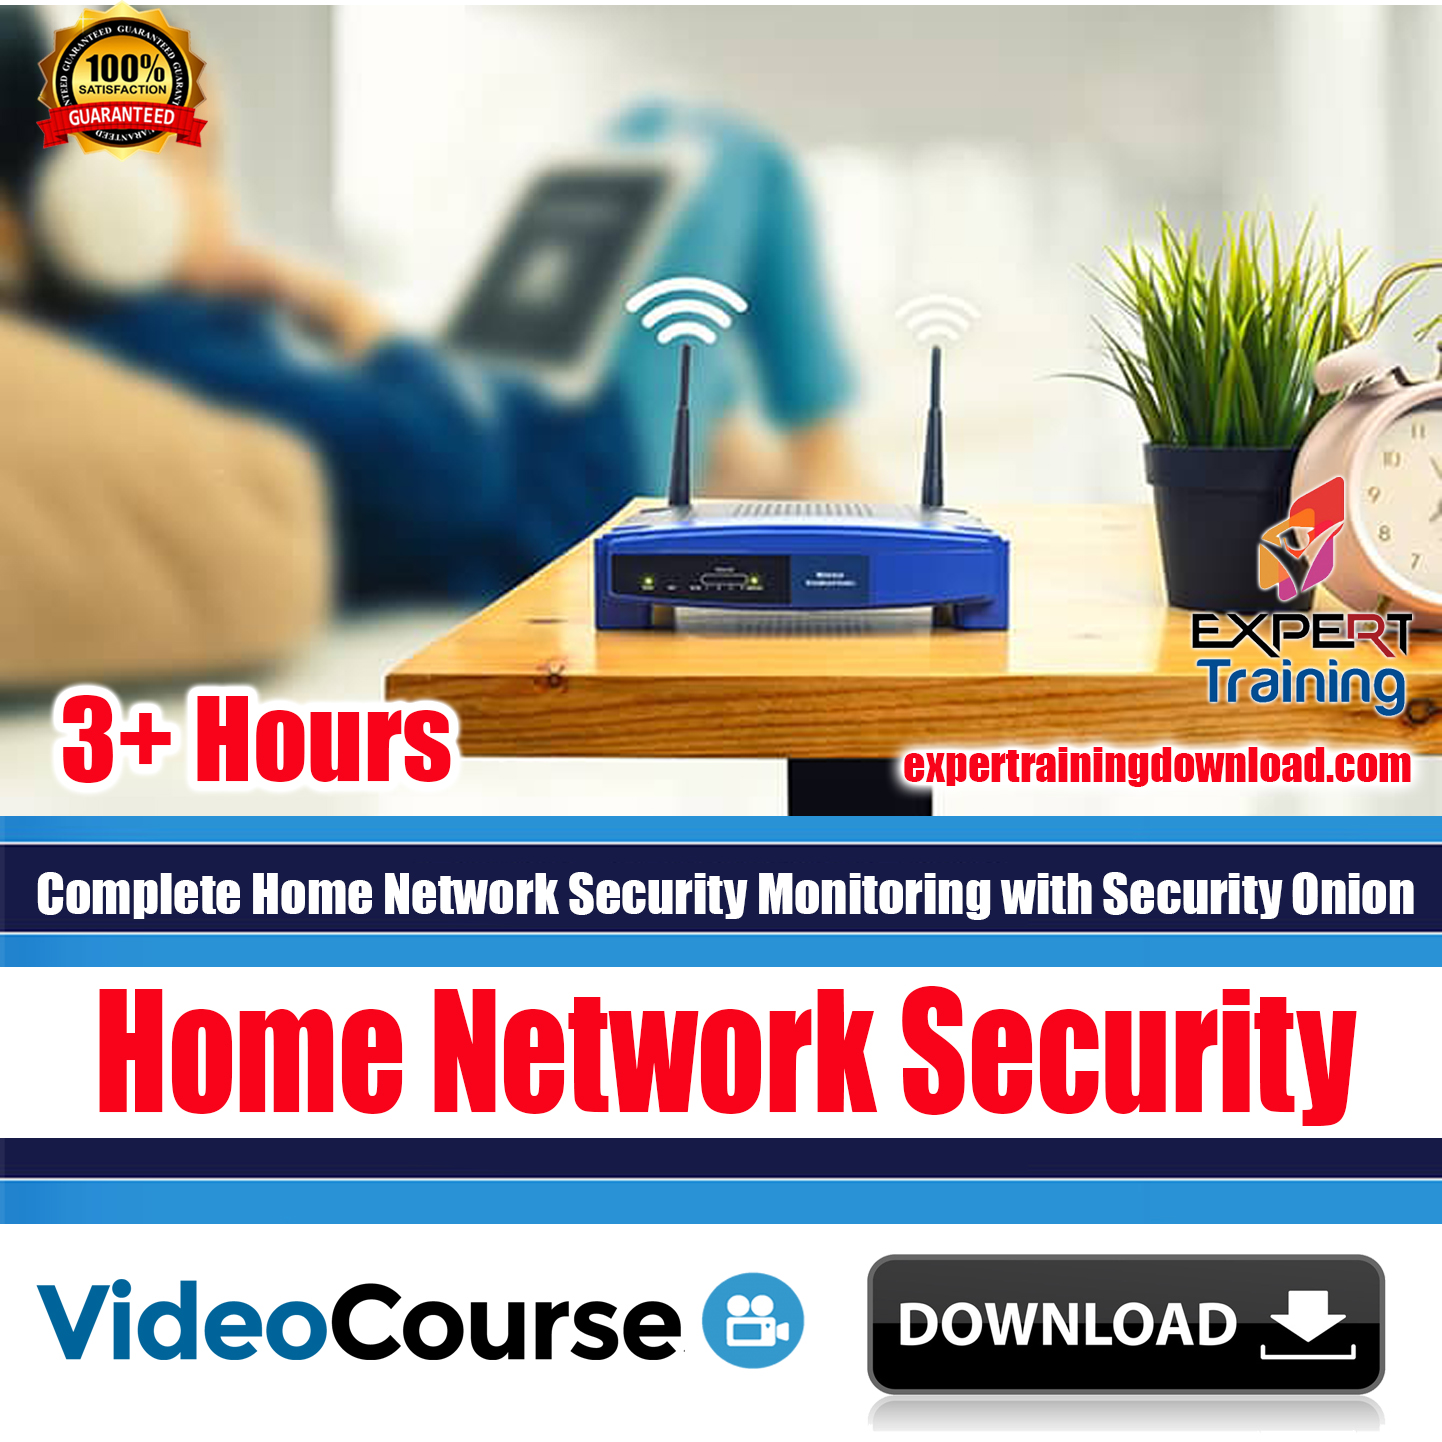 Complete Home Network Security Monitoring with Security Onion